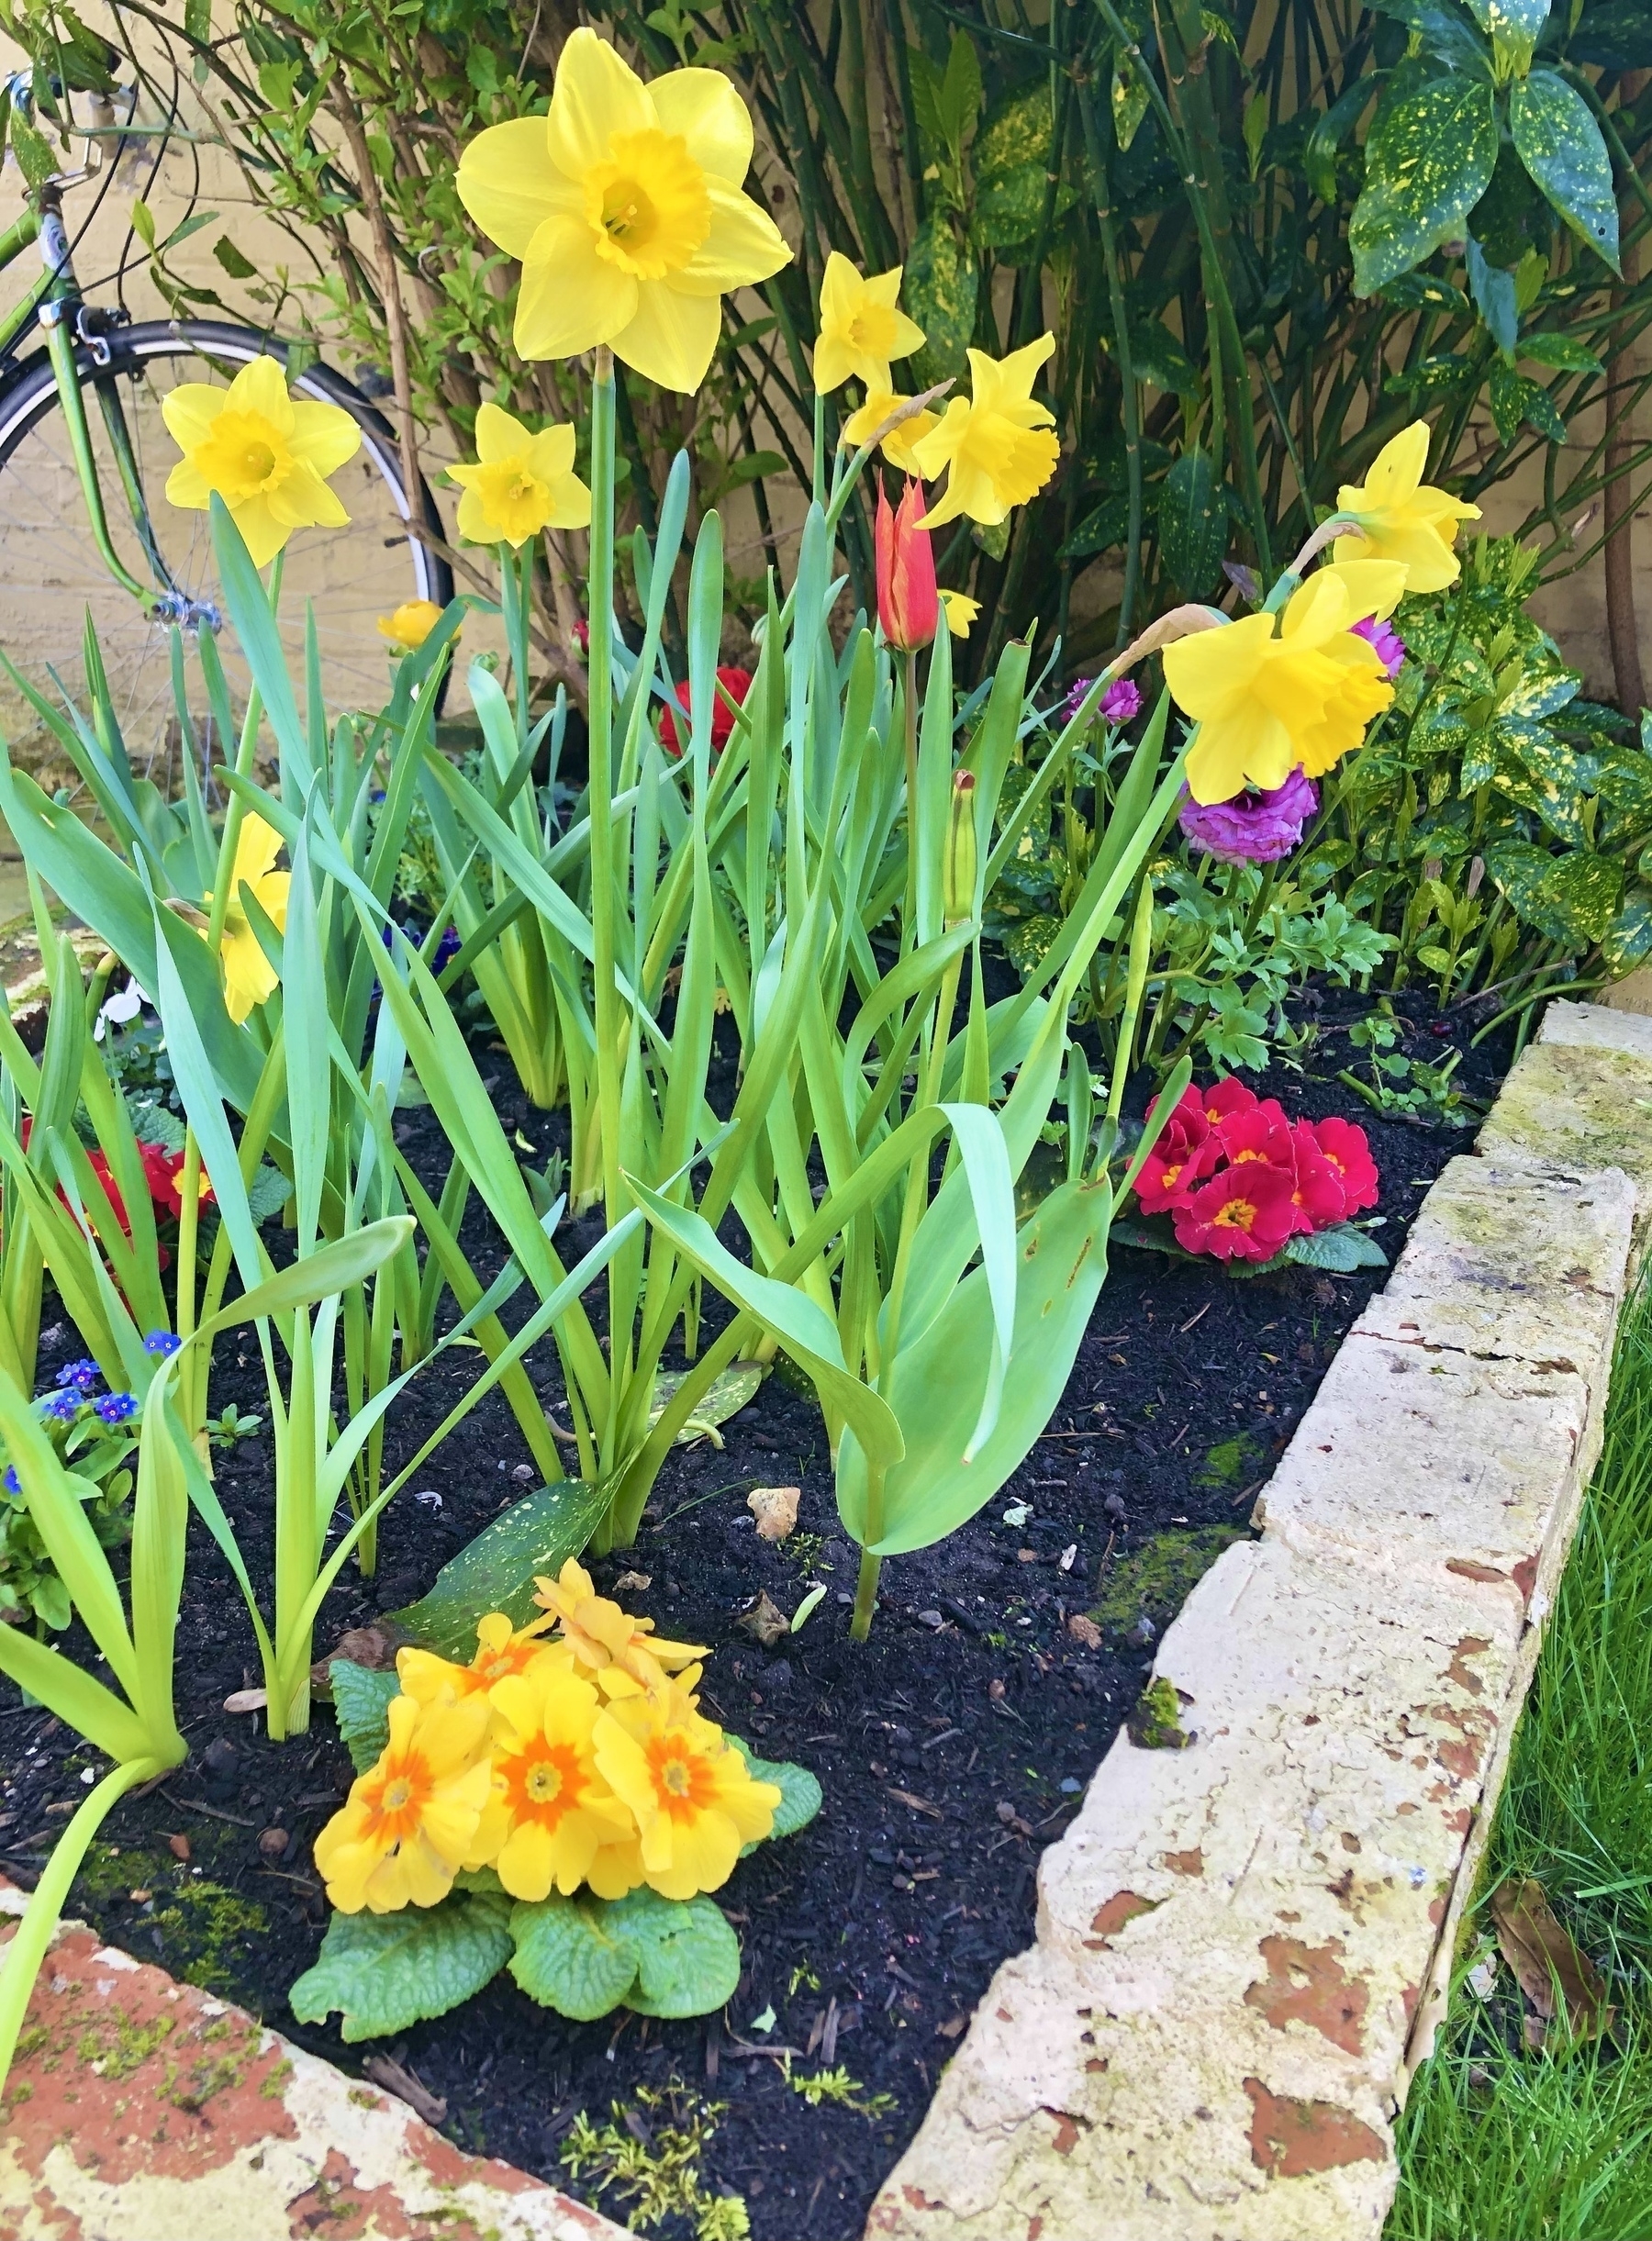 Bright bed of flowers including daffodils and primulas